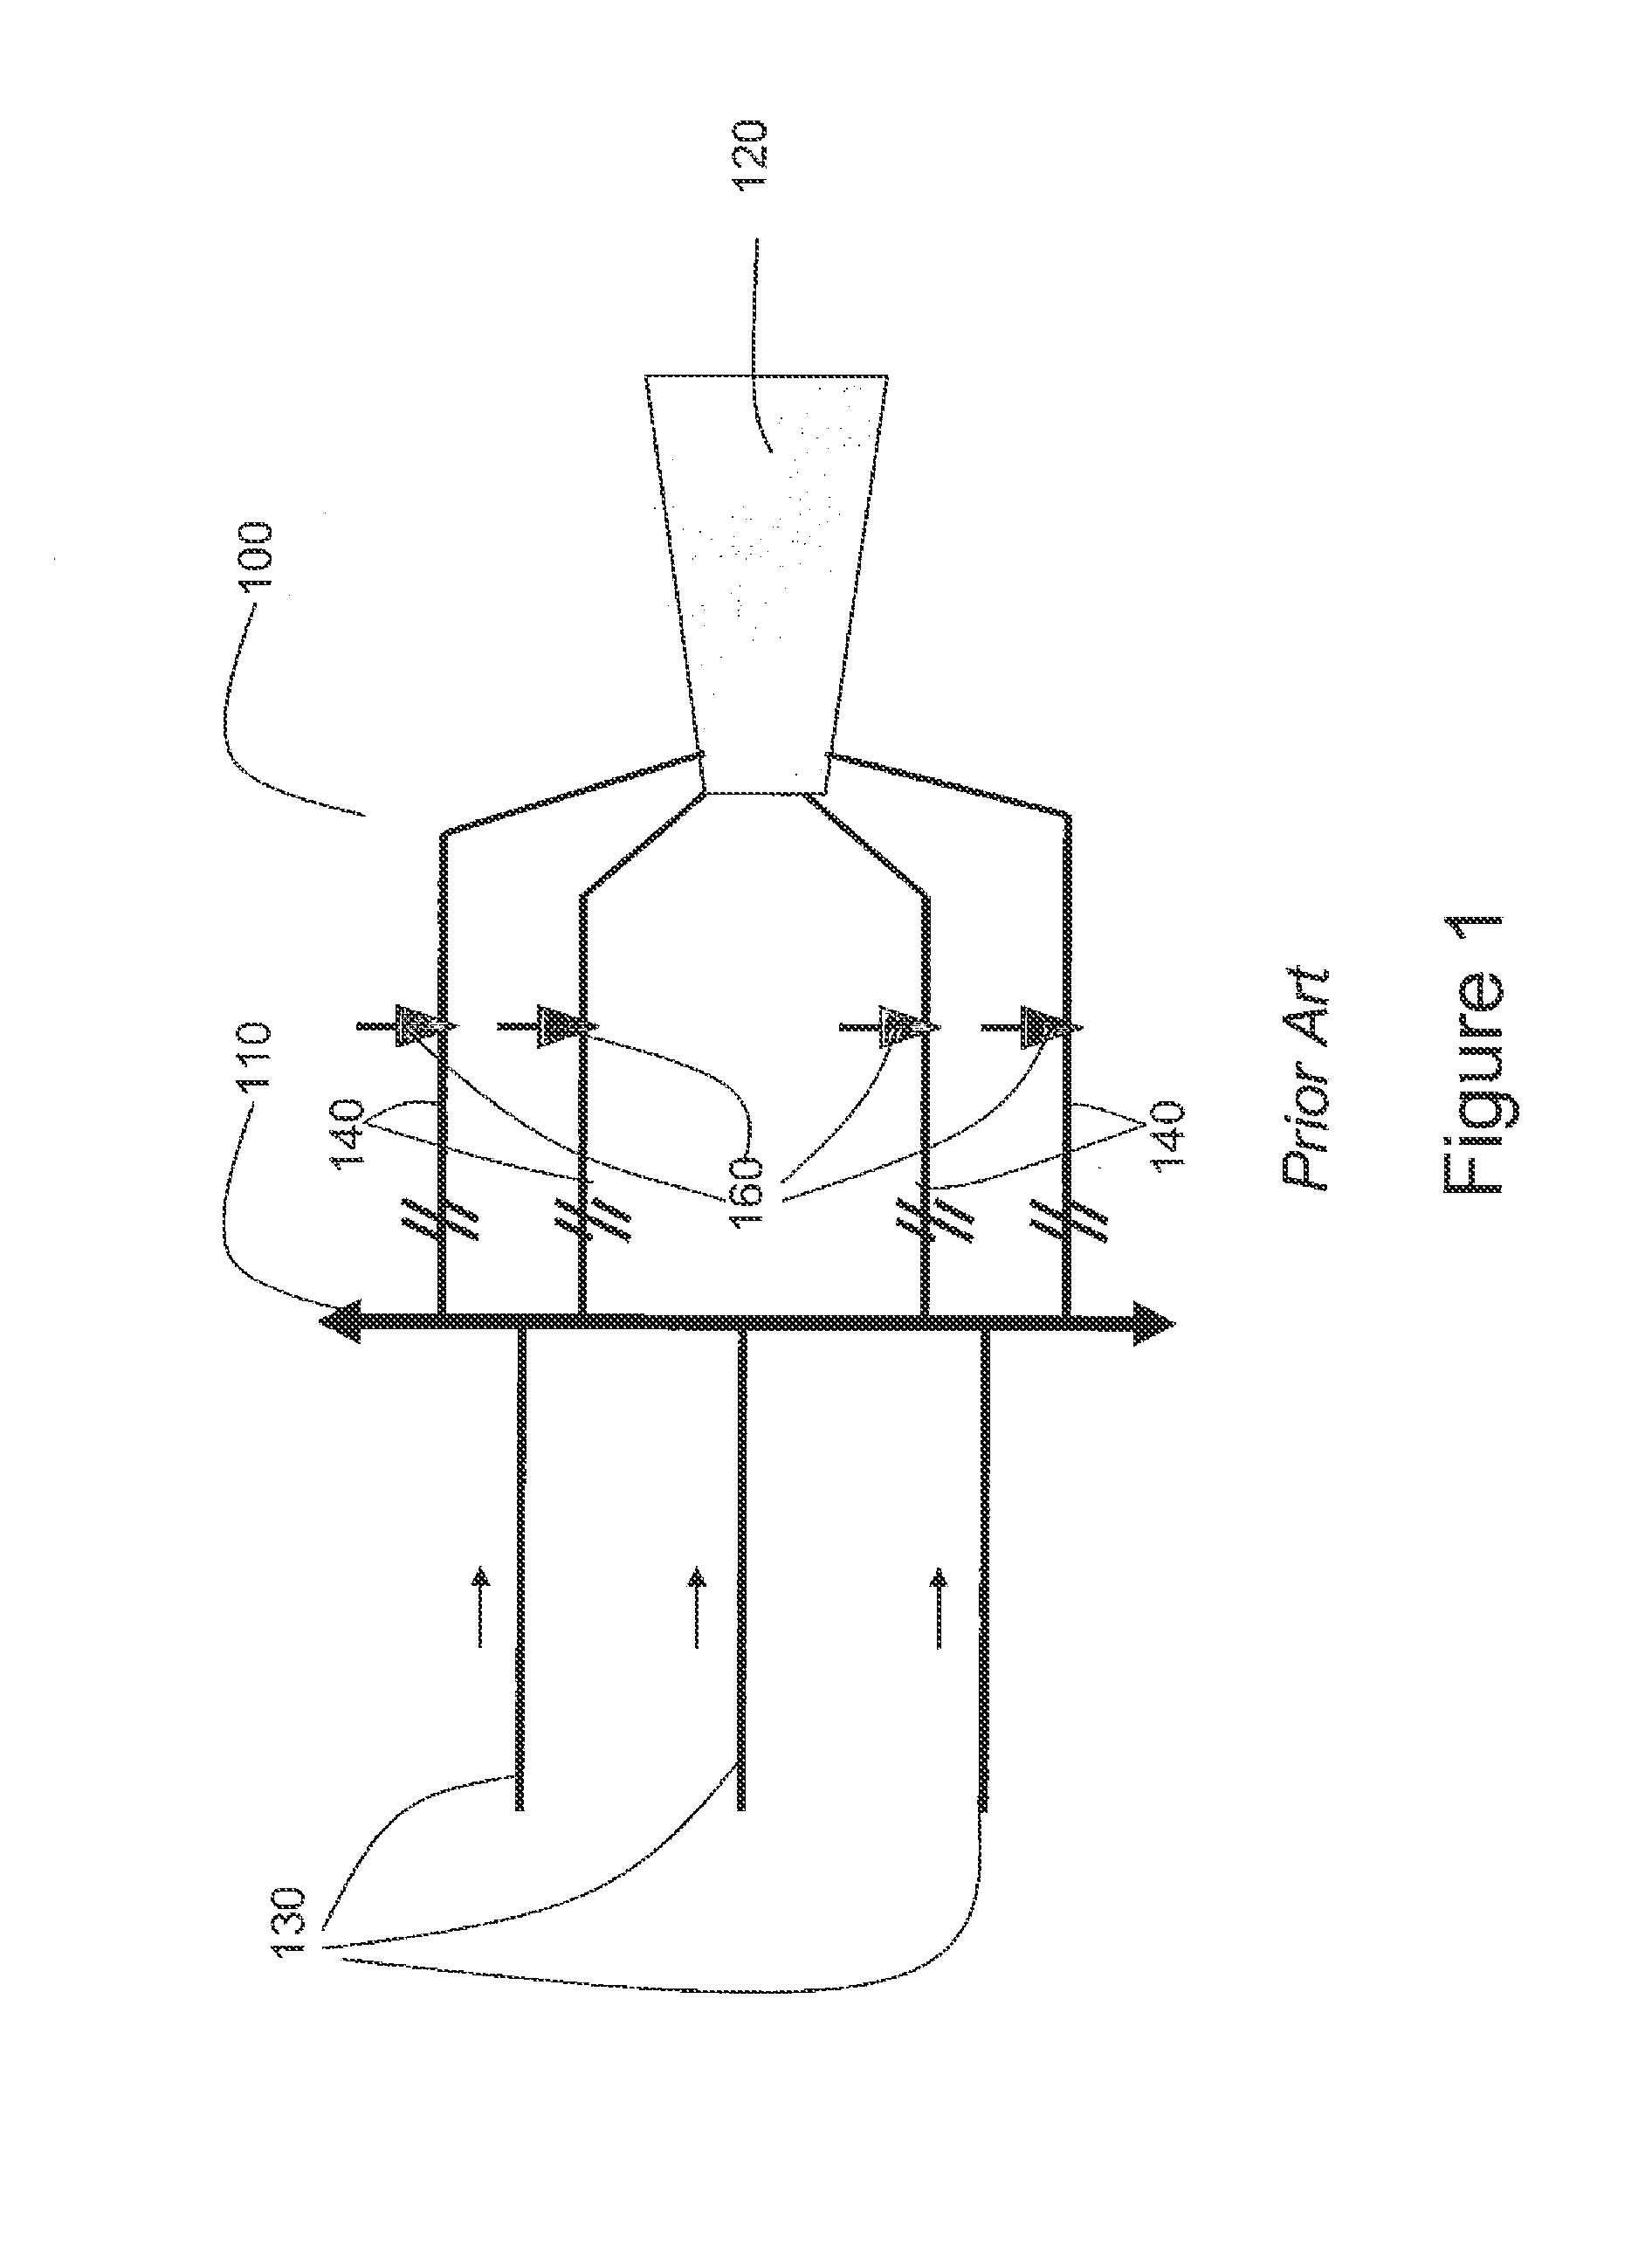 Steam supply circuit from a turbine